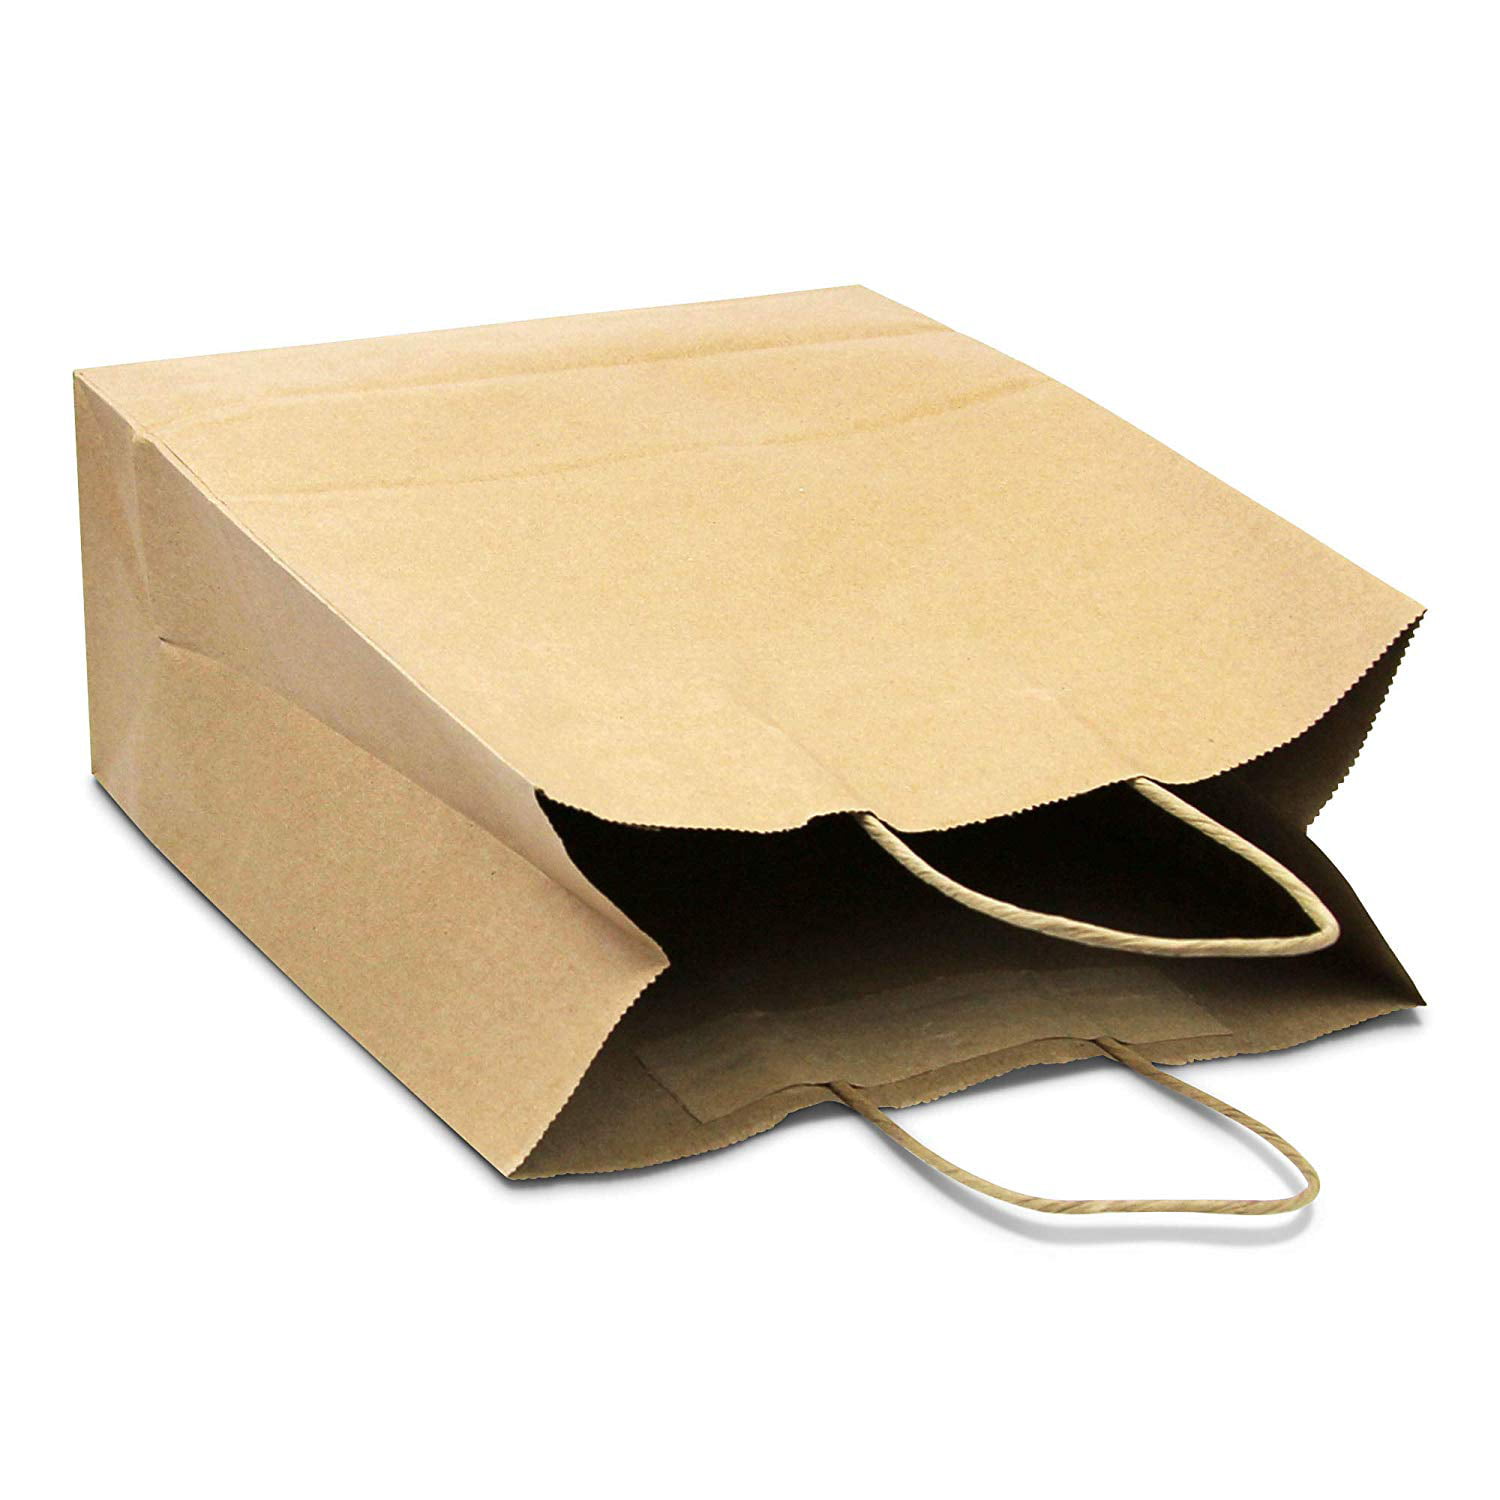 [50 Pack] Heavy Duty Kraft Paper Bags with Handles 13 x 10 x 5